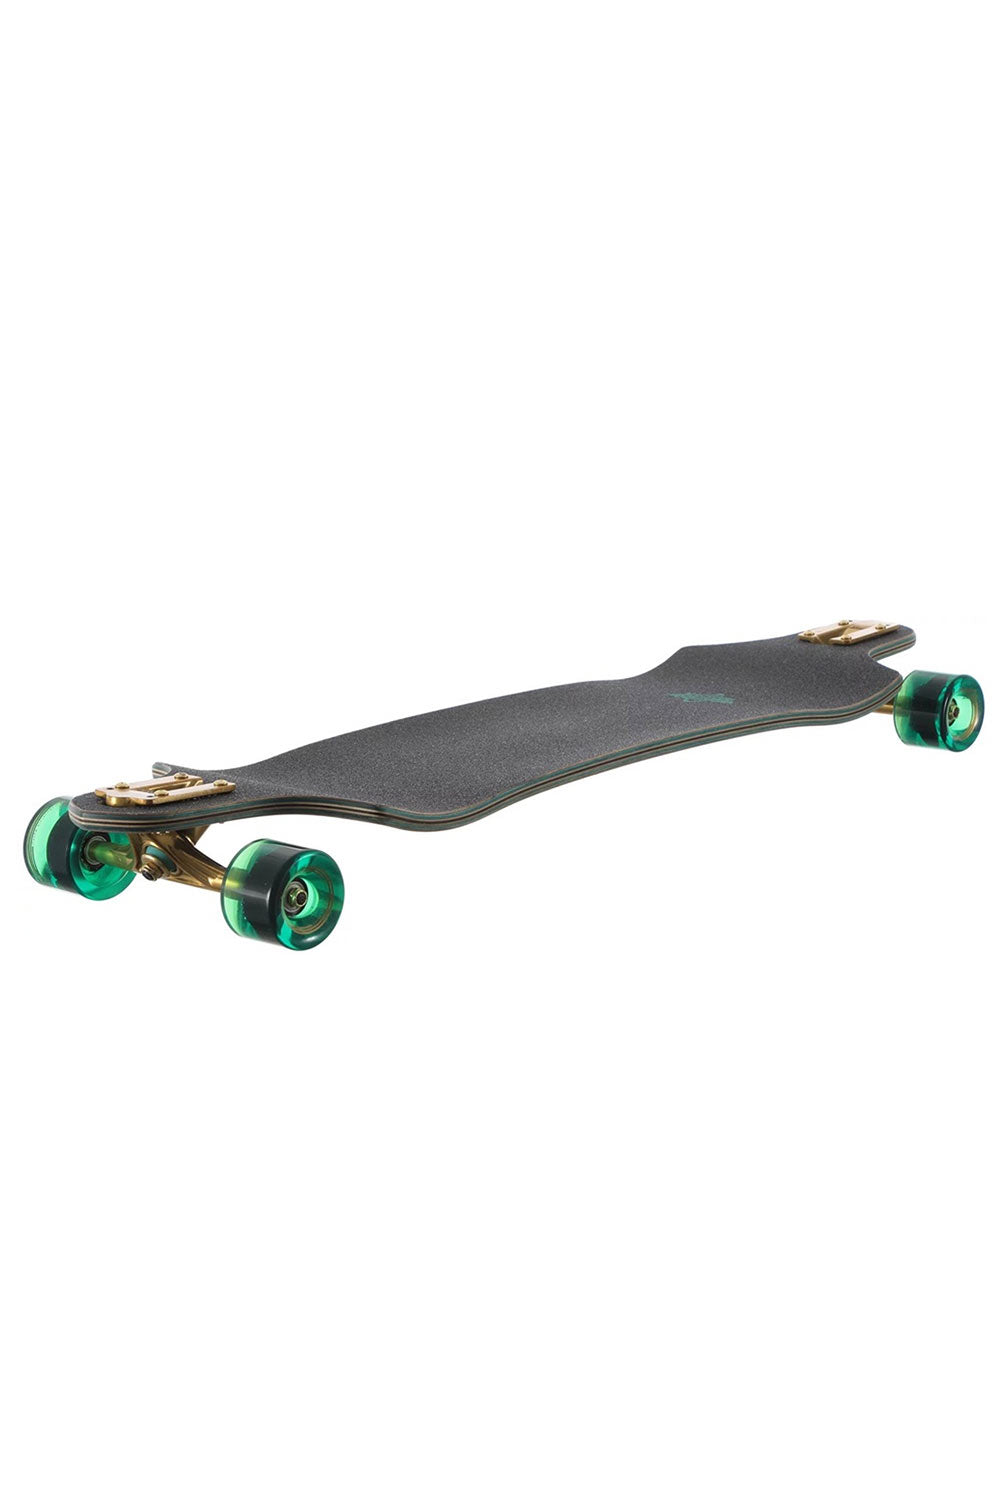 Dusters California | Dusters Golden State Cruiser Longboard